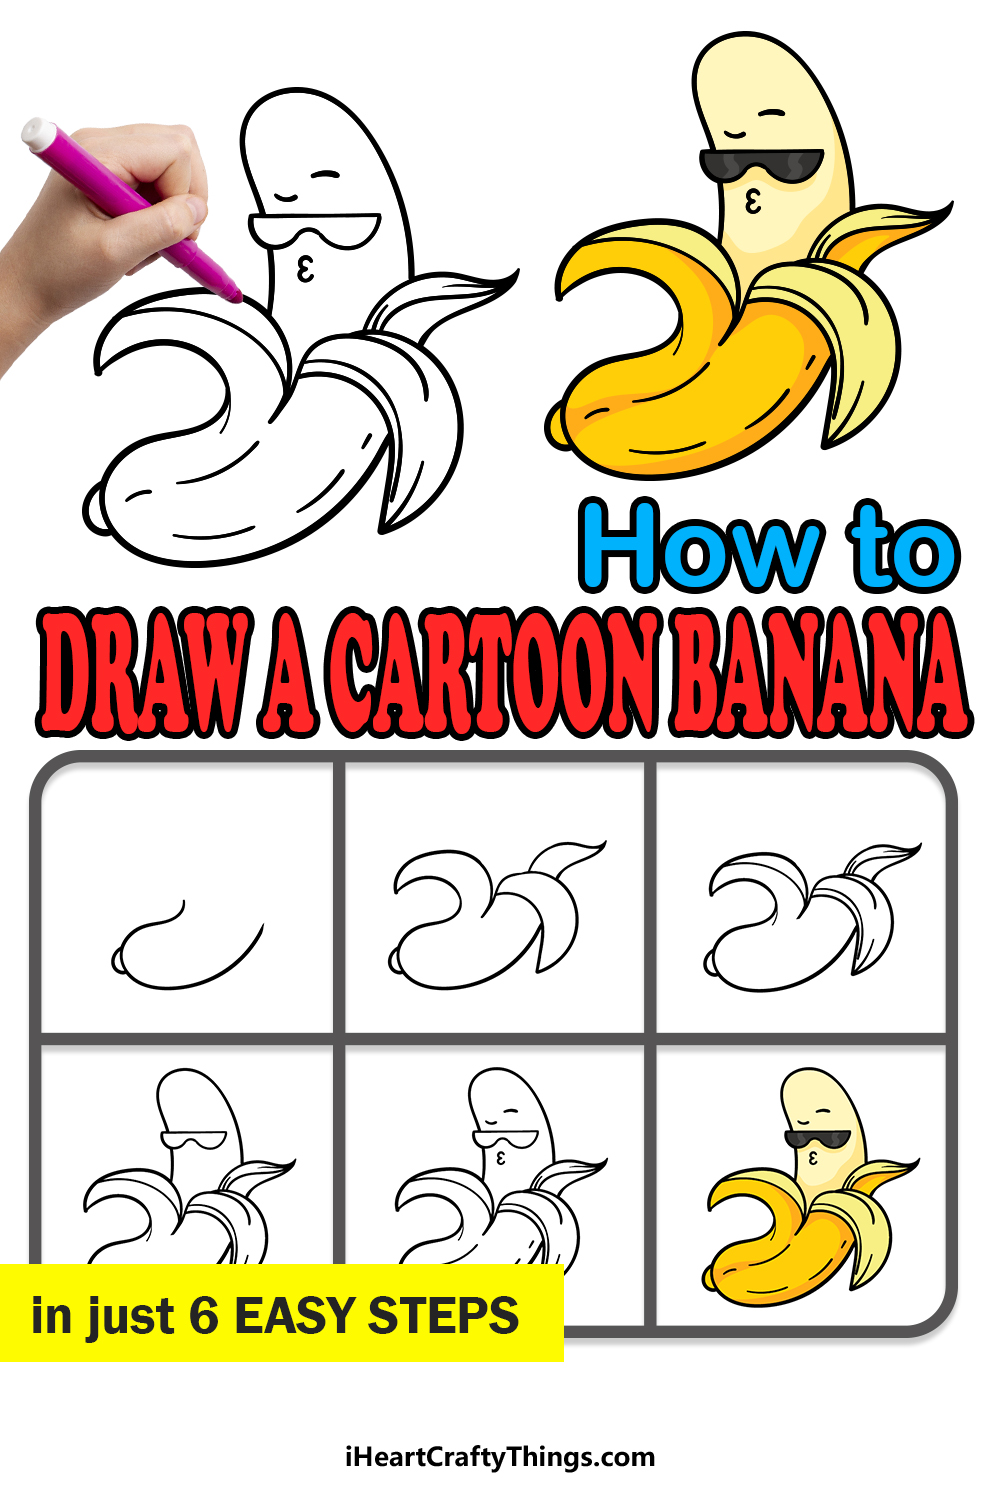 how to draw a Cartoon Banana in 6 easy steps